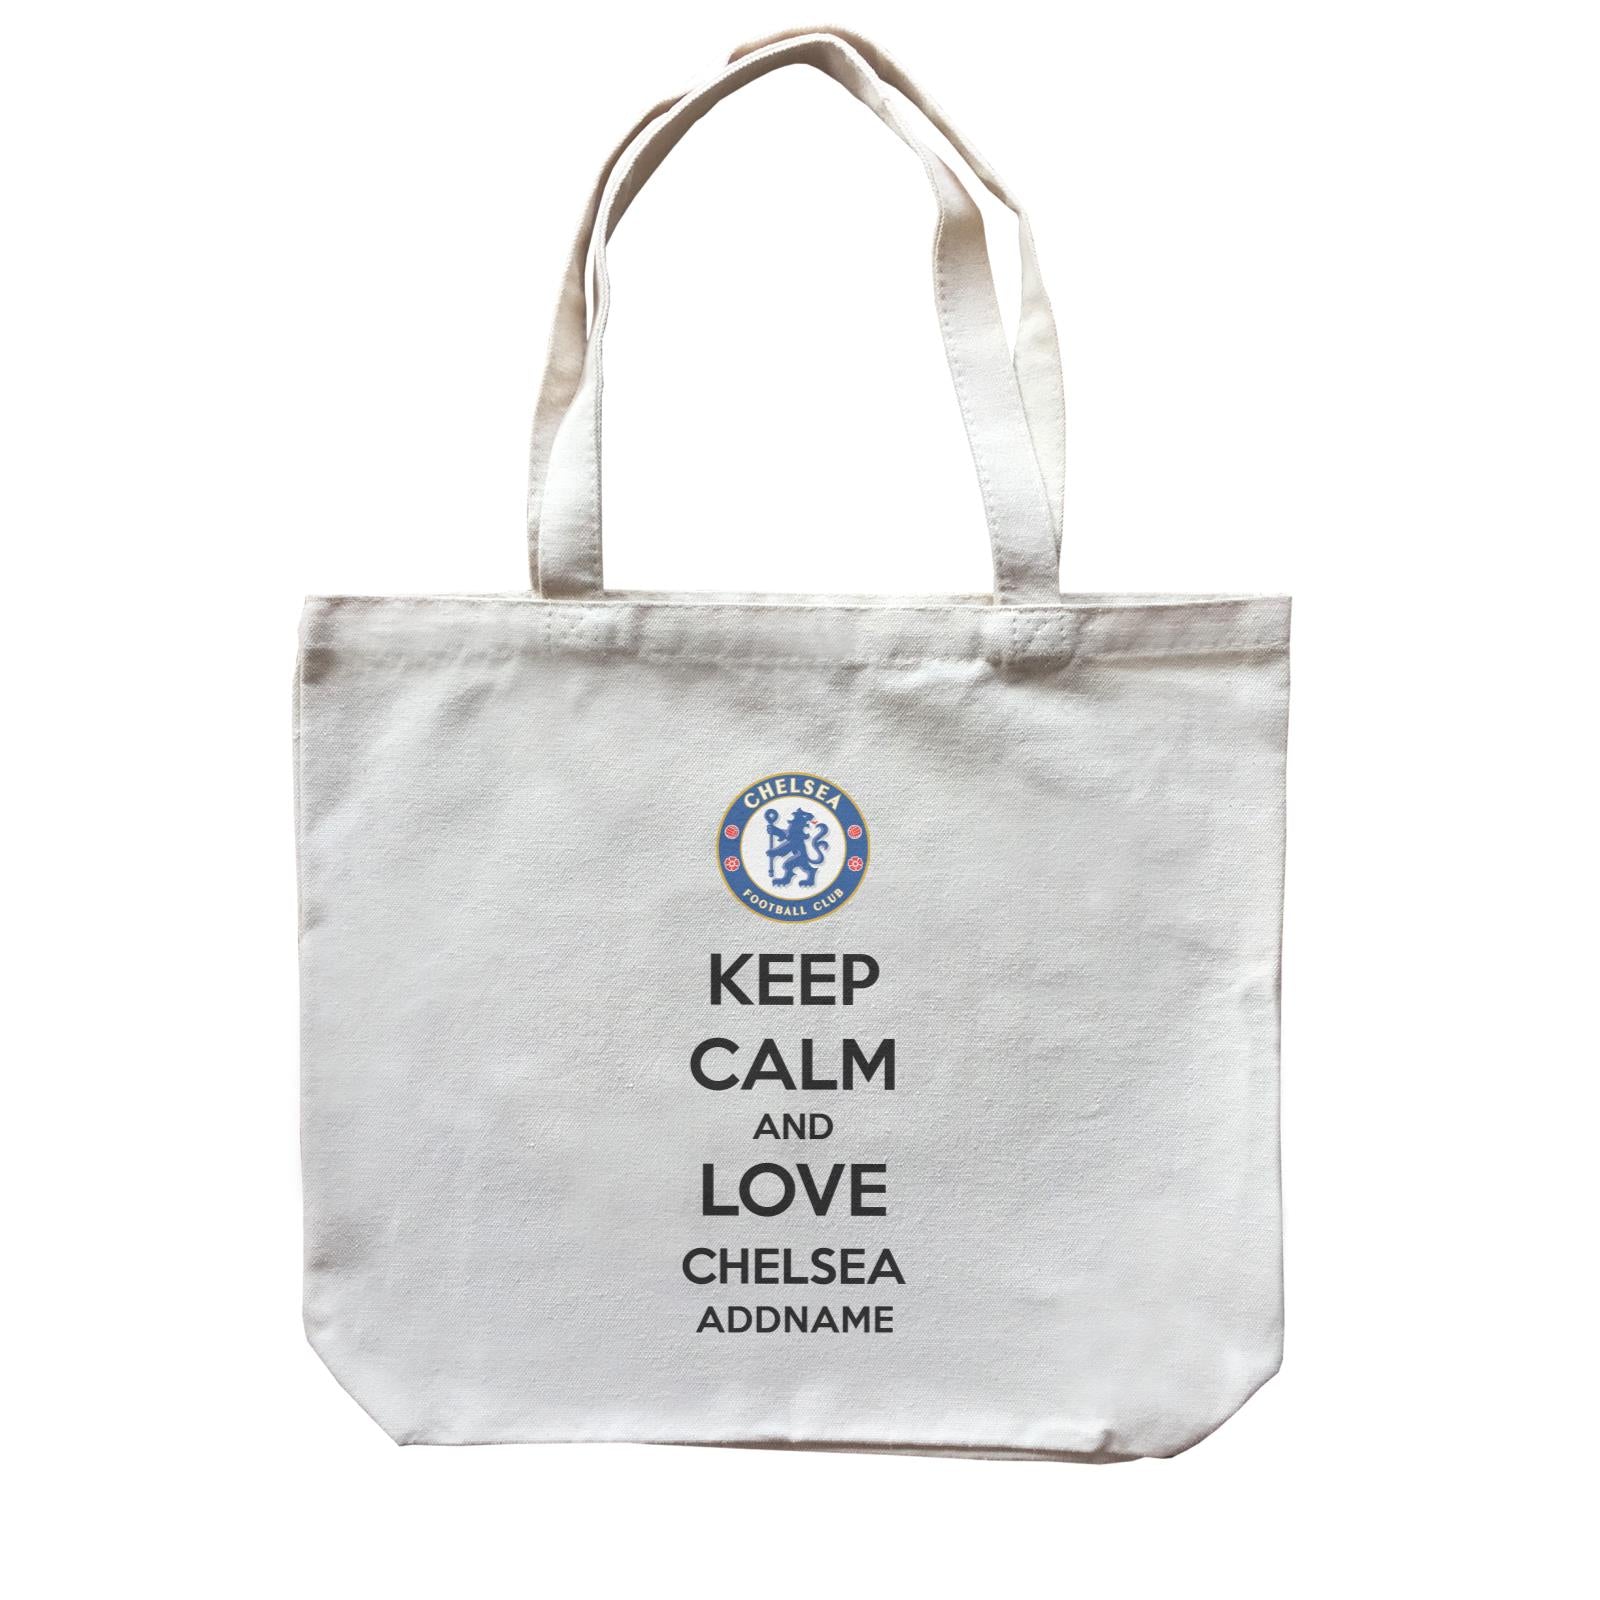 Chelsea Football Keep Calm And Love Series Addname Canvas Bag